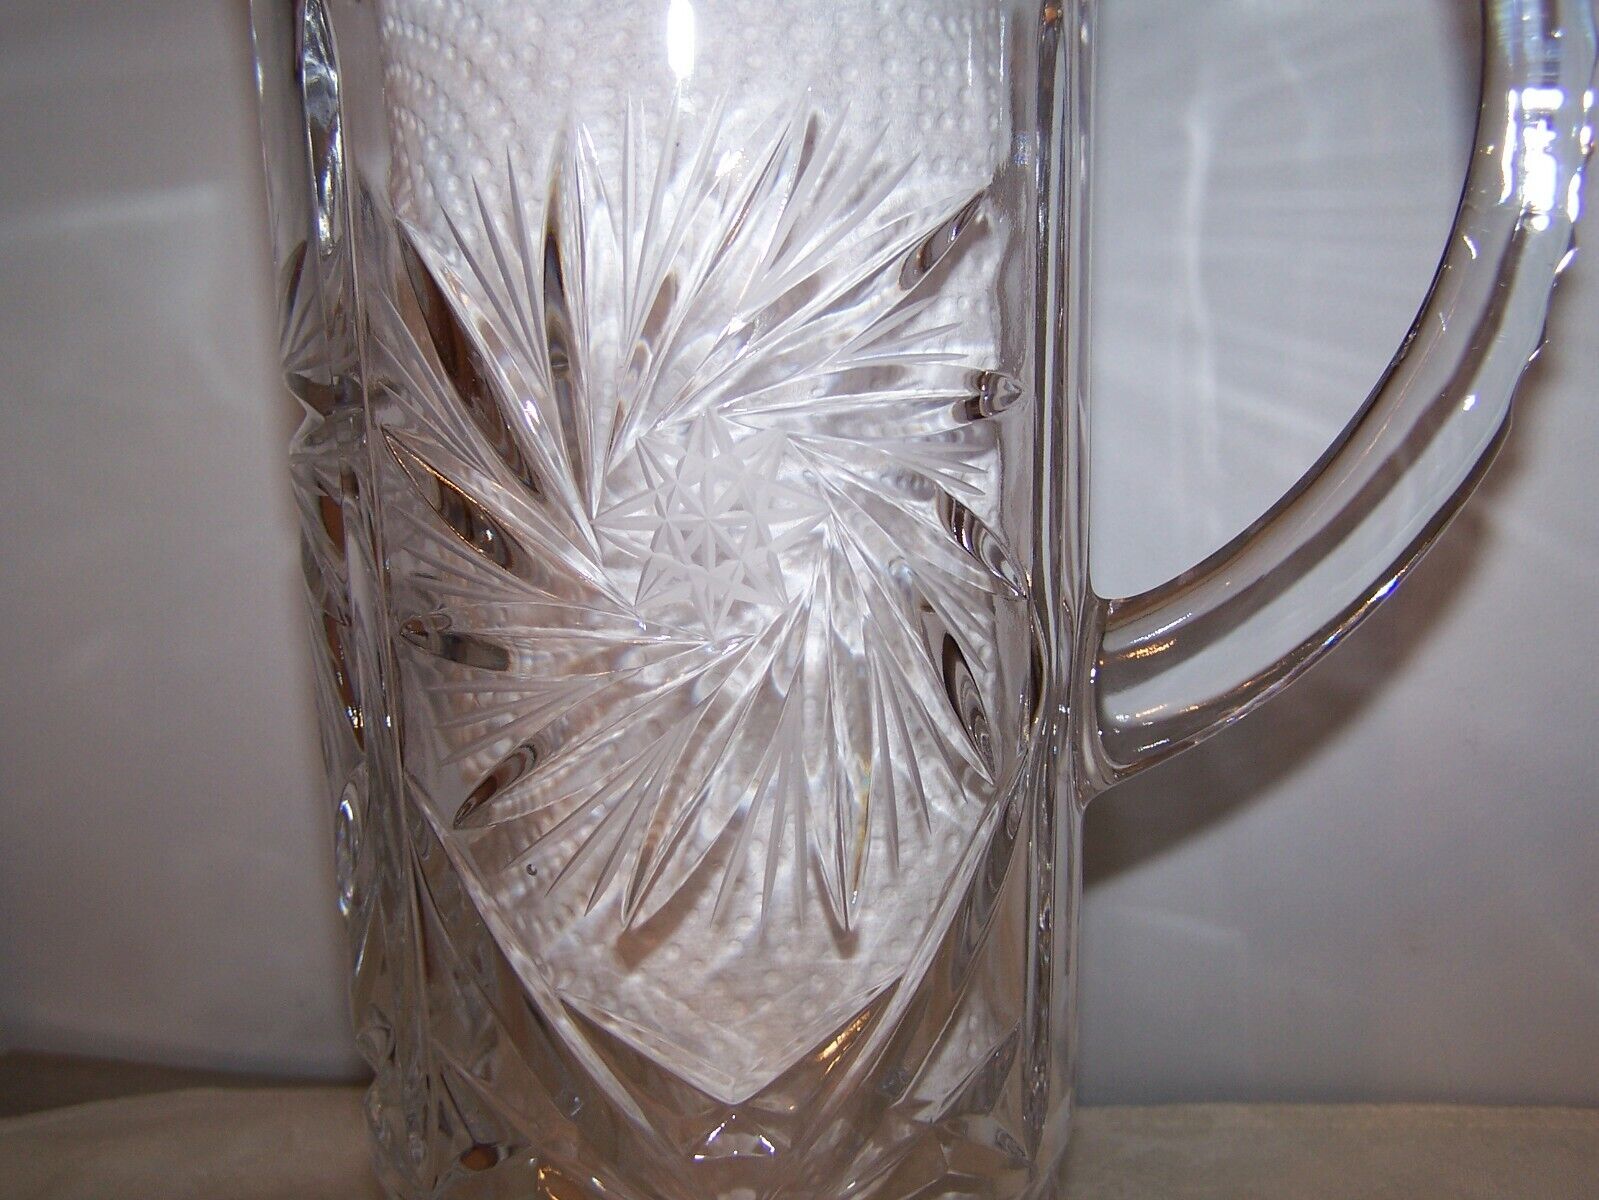 BEAUTIFUL PINWHEEL HEAVY 4 lb. 12 oz. CRYSTAL WATER PITCHER - 9 5/8 INCHES HIGH